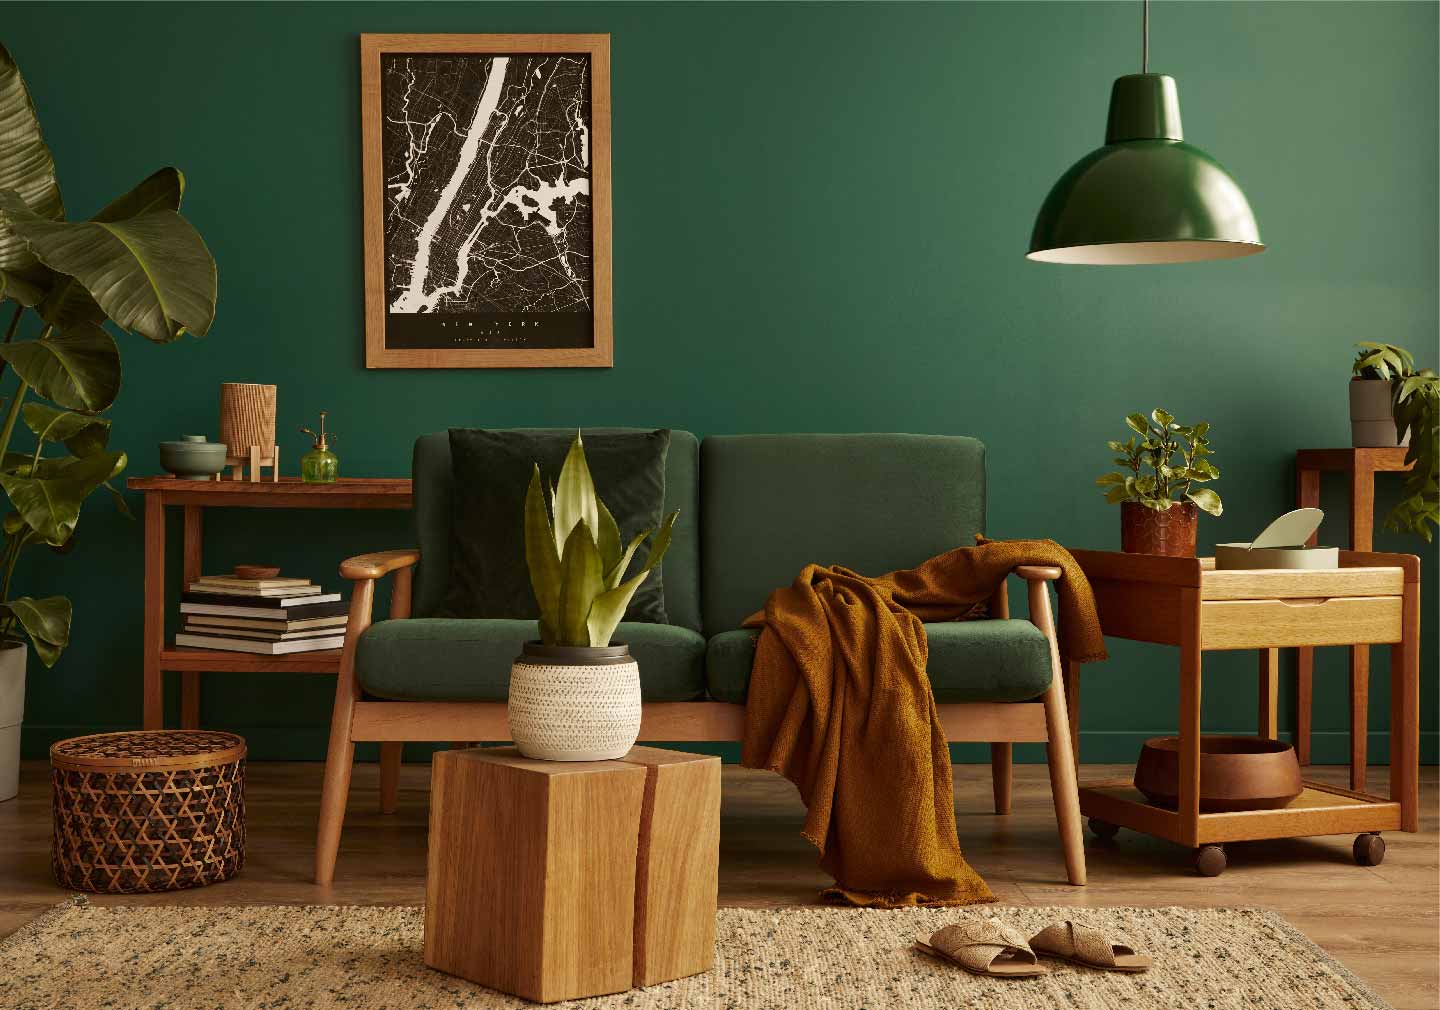 A living room sofa and green color theme to elevate your interior designs moods